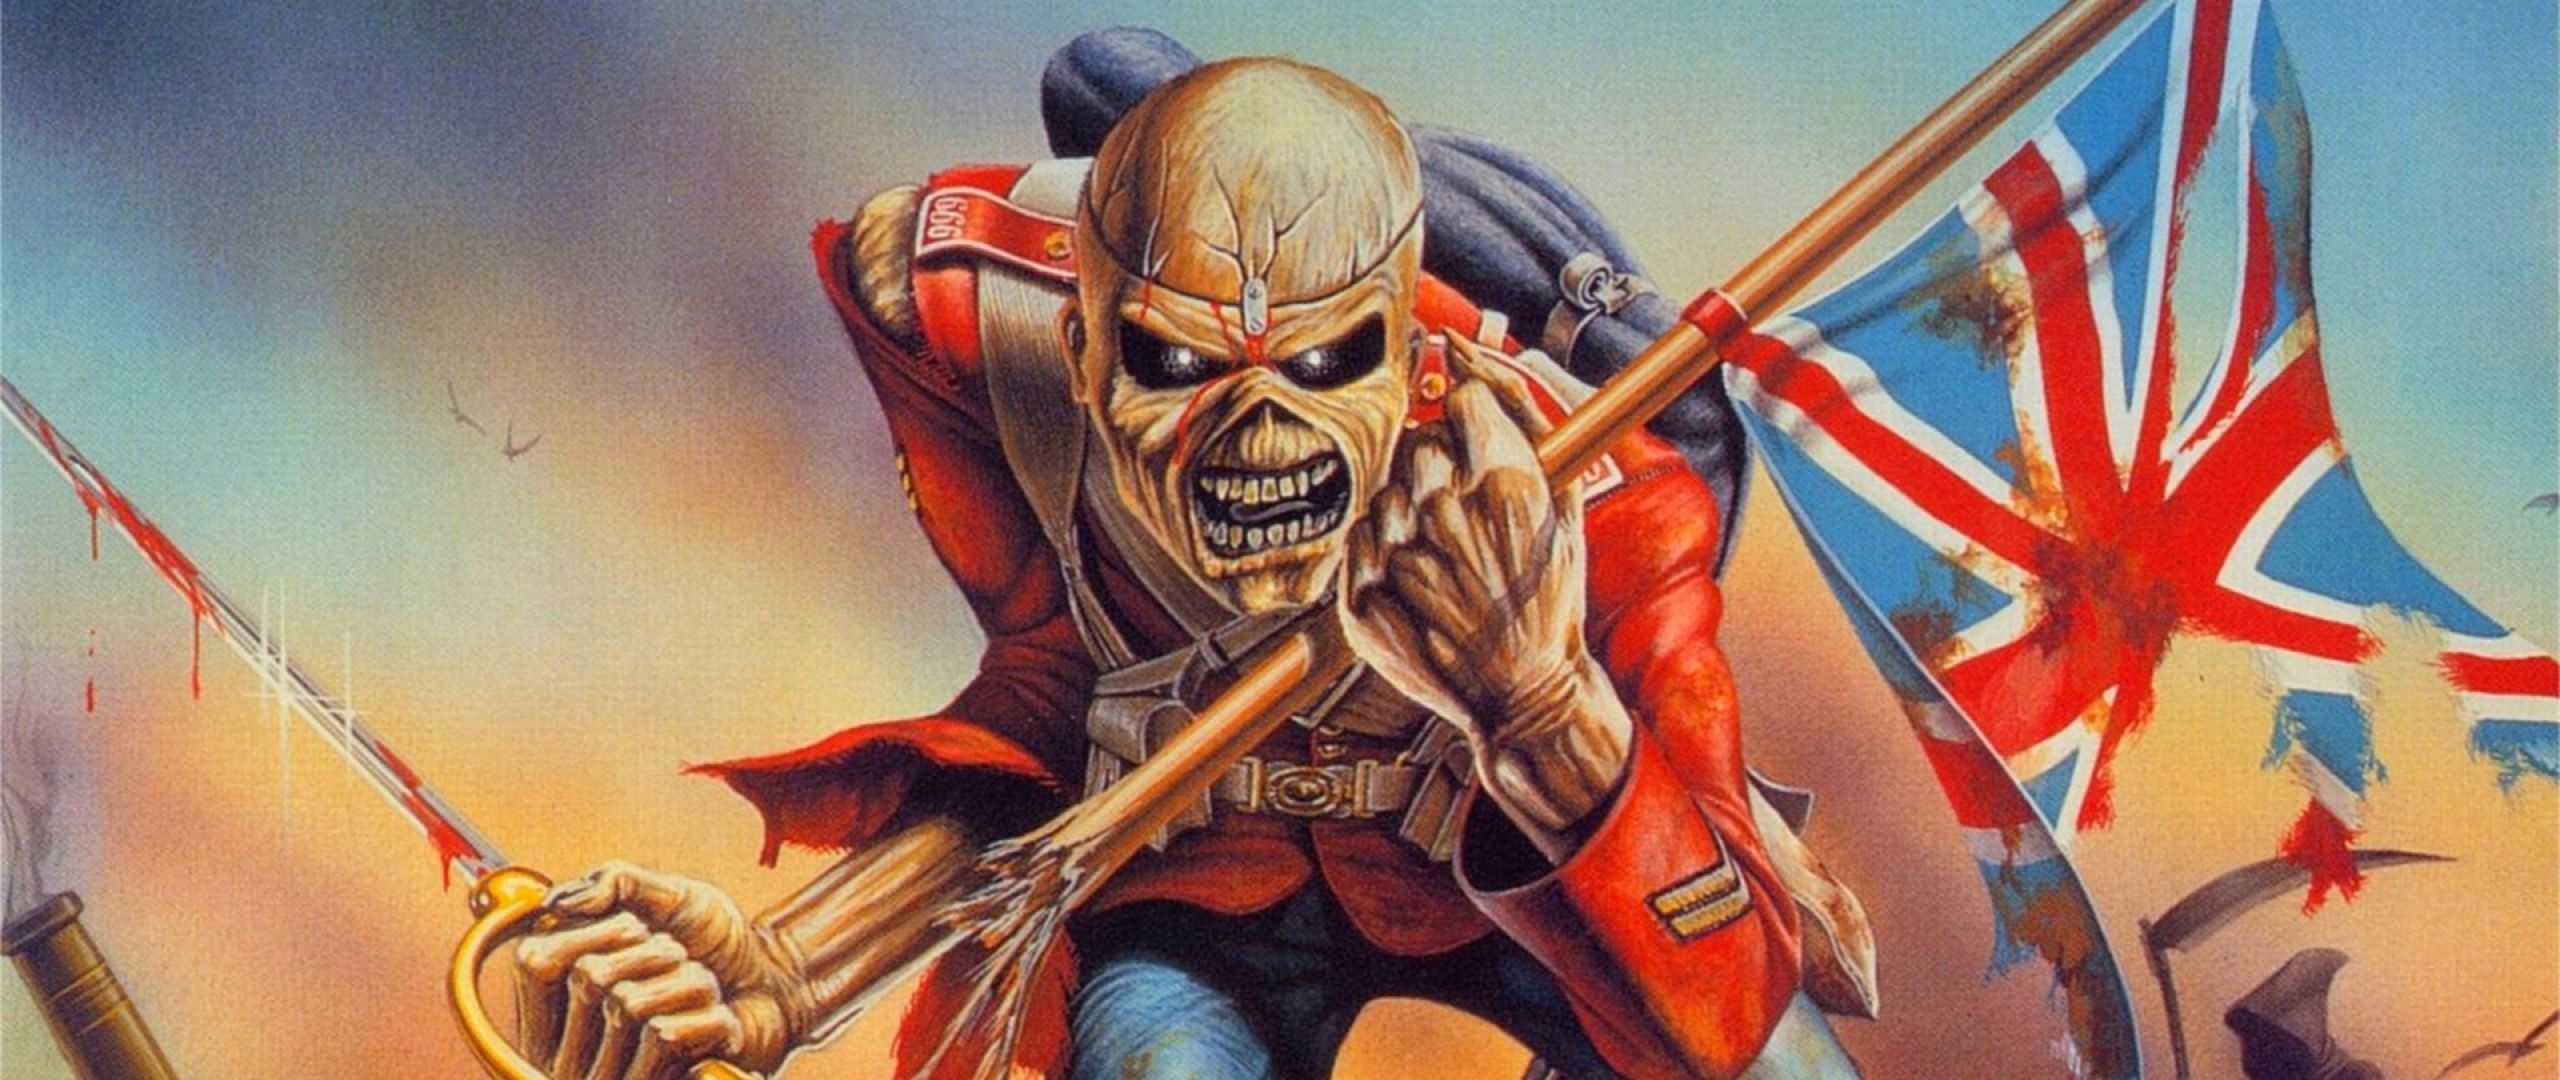 Iron Maiden Band Music, The Trooper wallpaper, Iconic album cover, Powerful visual, 2560x1080 Dual Screen Desktop